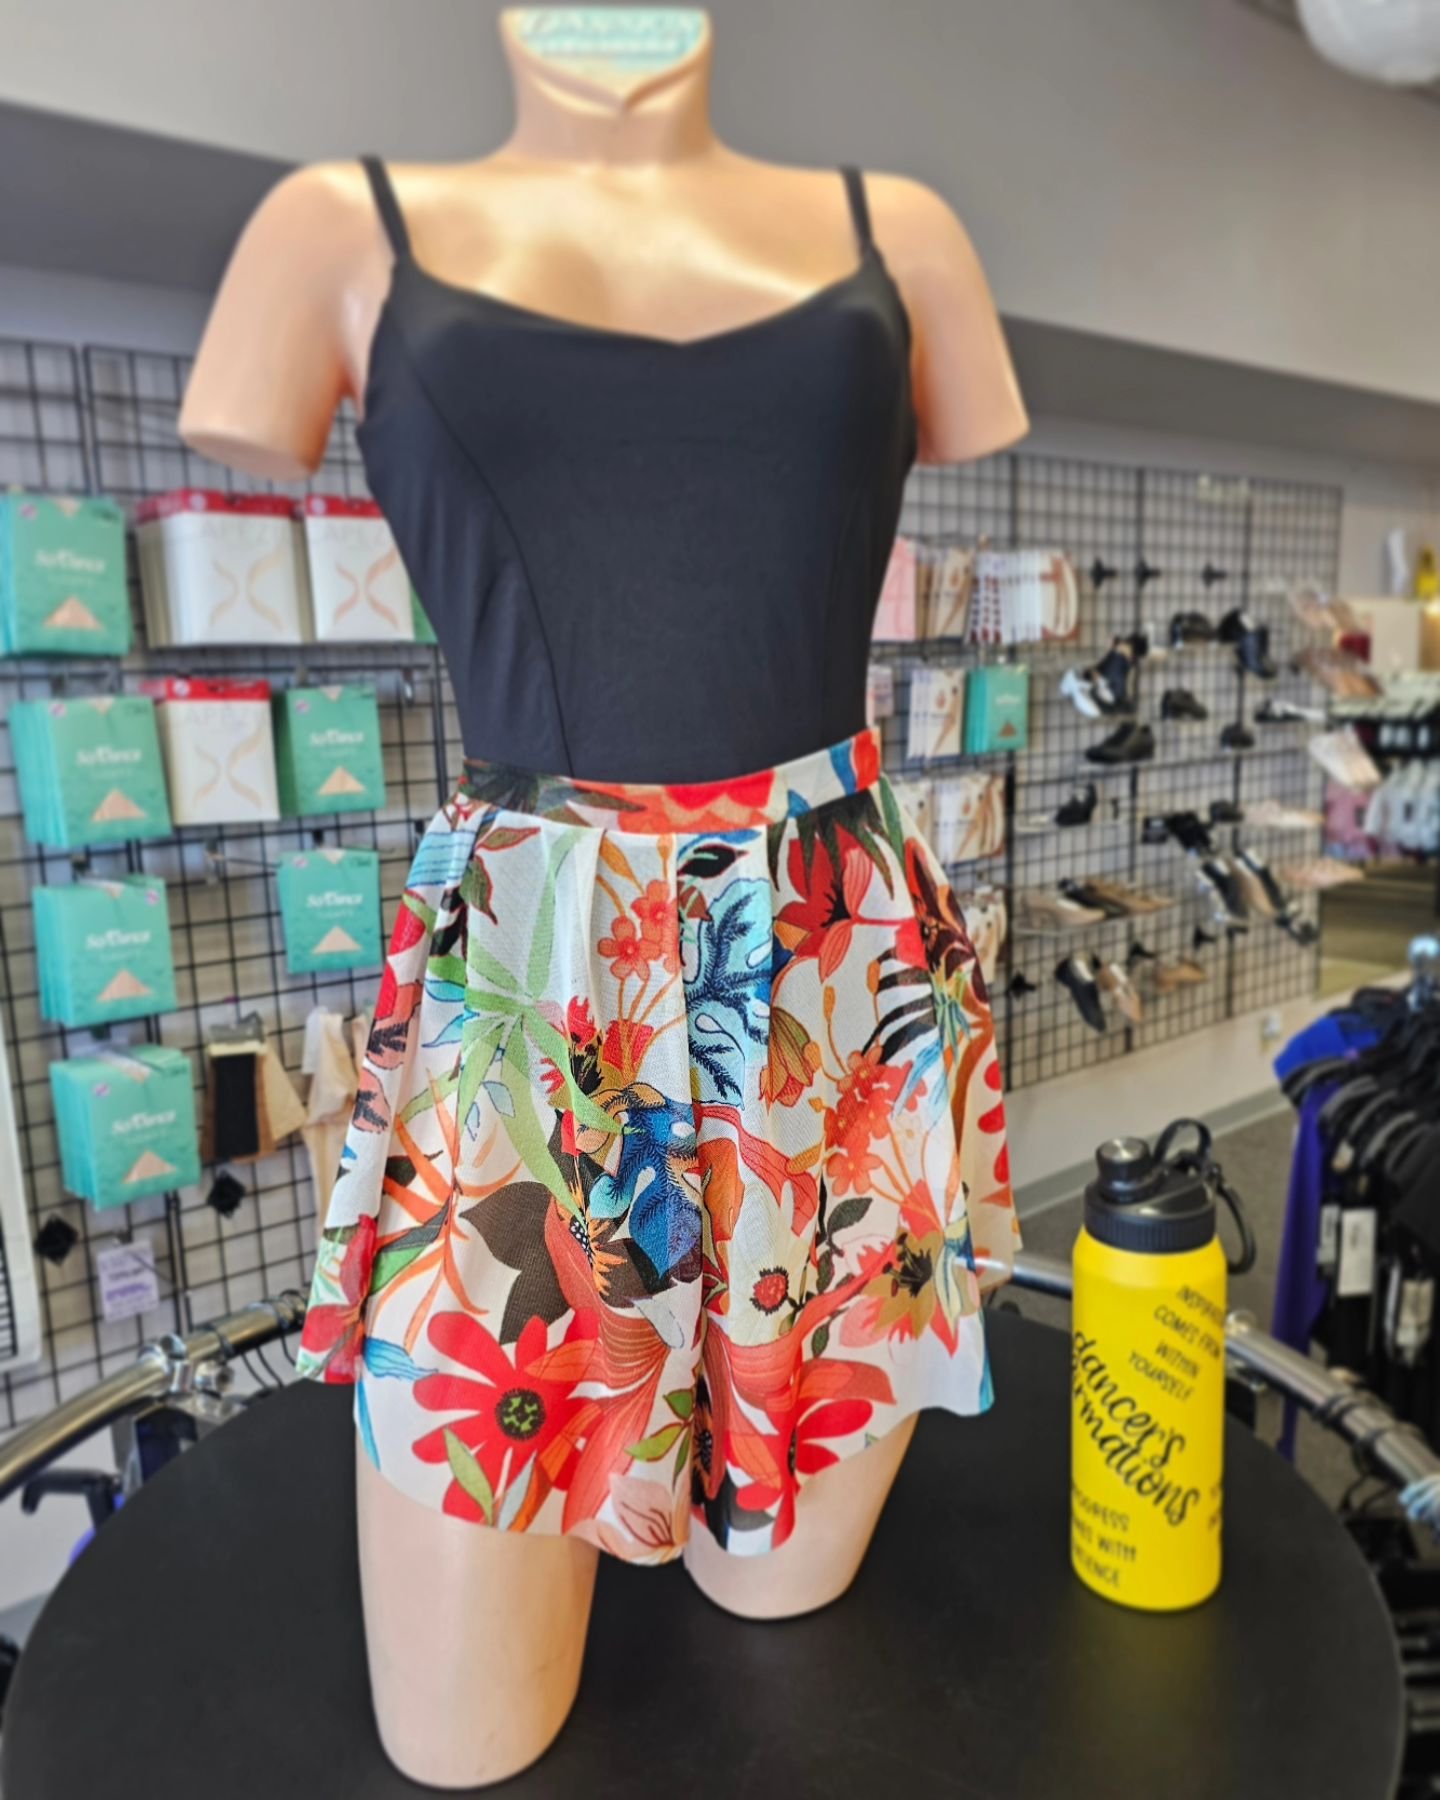 The long awaited &quot;Freddie&quot; shorts are here! 

Available in yellow and tropical print. Women's sizing XS to 3XL💛

#NMDancewear #dance #dancewear
#ballet #jazz #flamenco #tap #hiphop #contemporary #newmexicodancewear #newmexicodance #nmdance